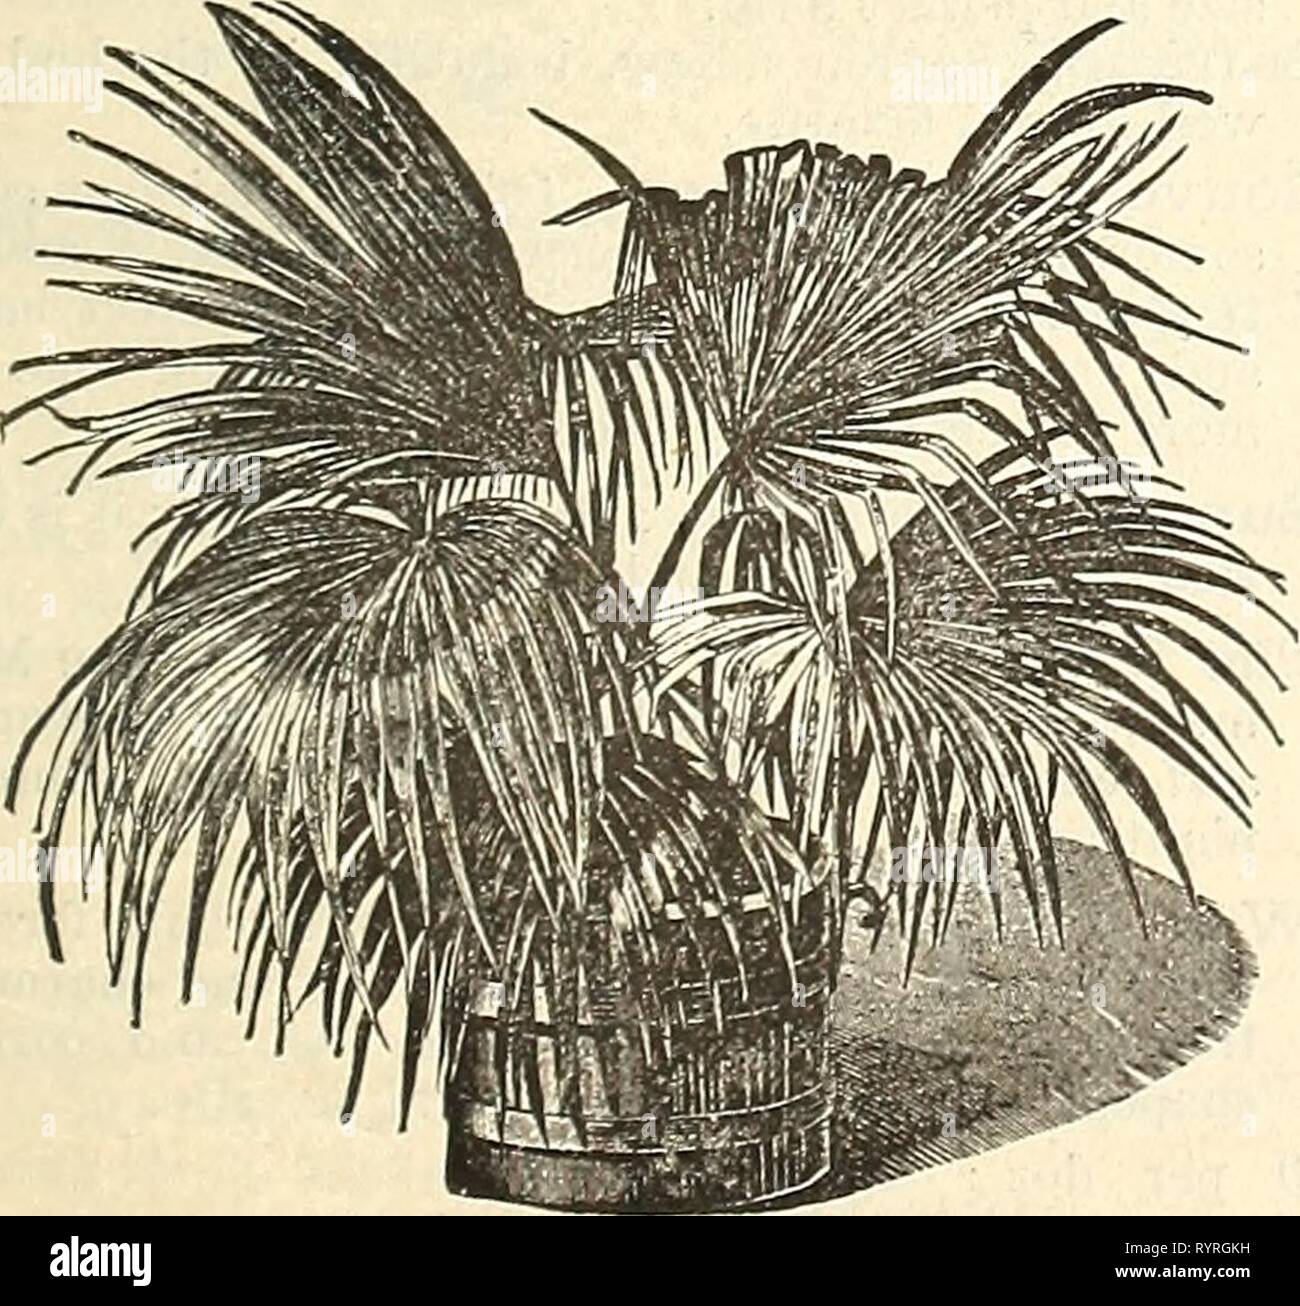 Dreer's mid-summer list (1891) Dreer's mid-summer list . dreersmidsummerl1891henr Year: 1891  Chamserops Excelsa. A handsome Fan Palm, of rapid, easy culture. 50 cts. Cocos Weddelliana. The most relegant and graceful of all the smaller Palms. The Cocos are admirable for fern dishes, as they are of slow growth and maintain their beauty for a long time. 50 cts. to fl.OO each. Cocos Weddelliana. Areca Sanderiana. A beautiful new species, with deep glossy green foliage and red stems. 51.50 to $3.00 each. Areca Sapida. A strong upright growing variety with dark green feathered foliage. $1.00 to $3. Stock Photo